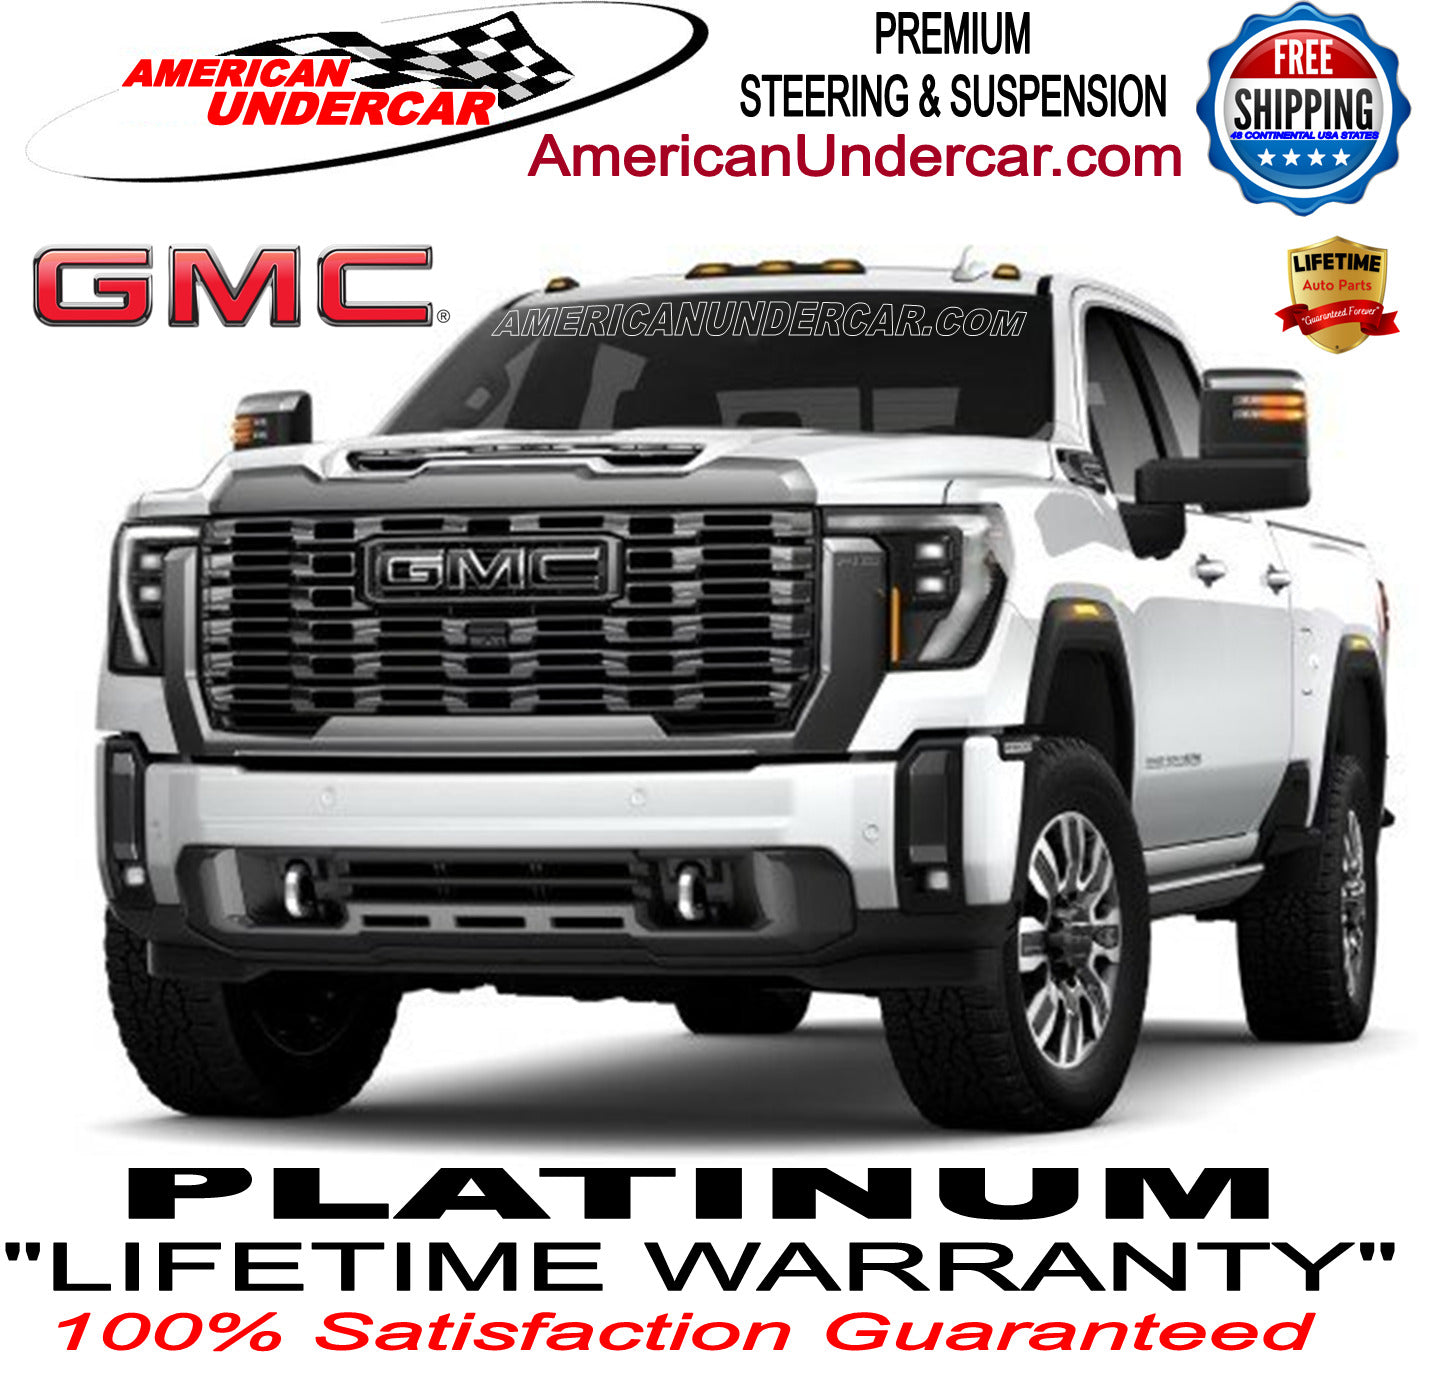 Lifetime Steering and Suspension Kit for 2001-2010 GMC Sierra 3500HD 4x4